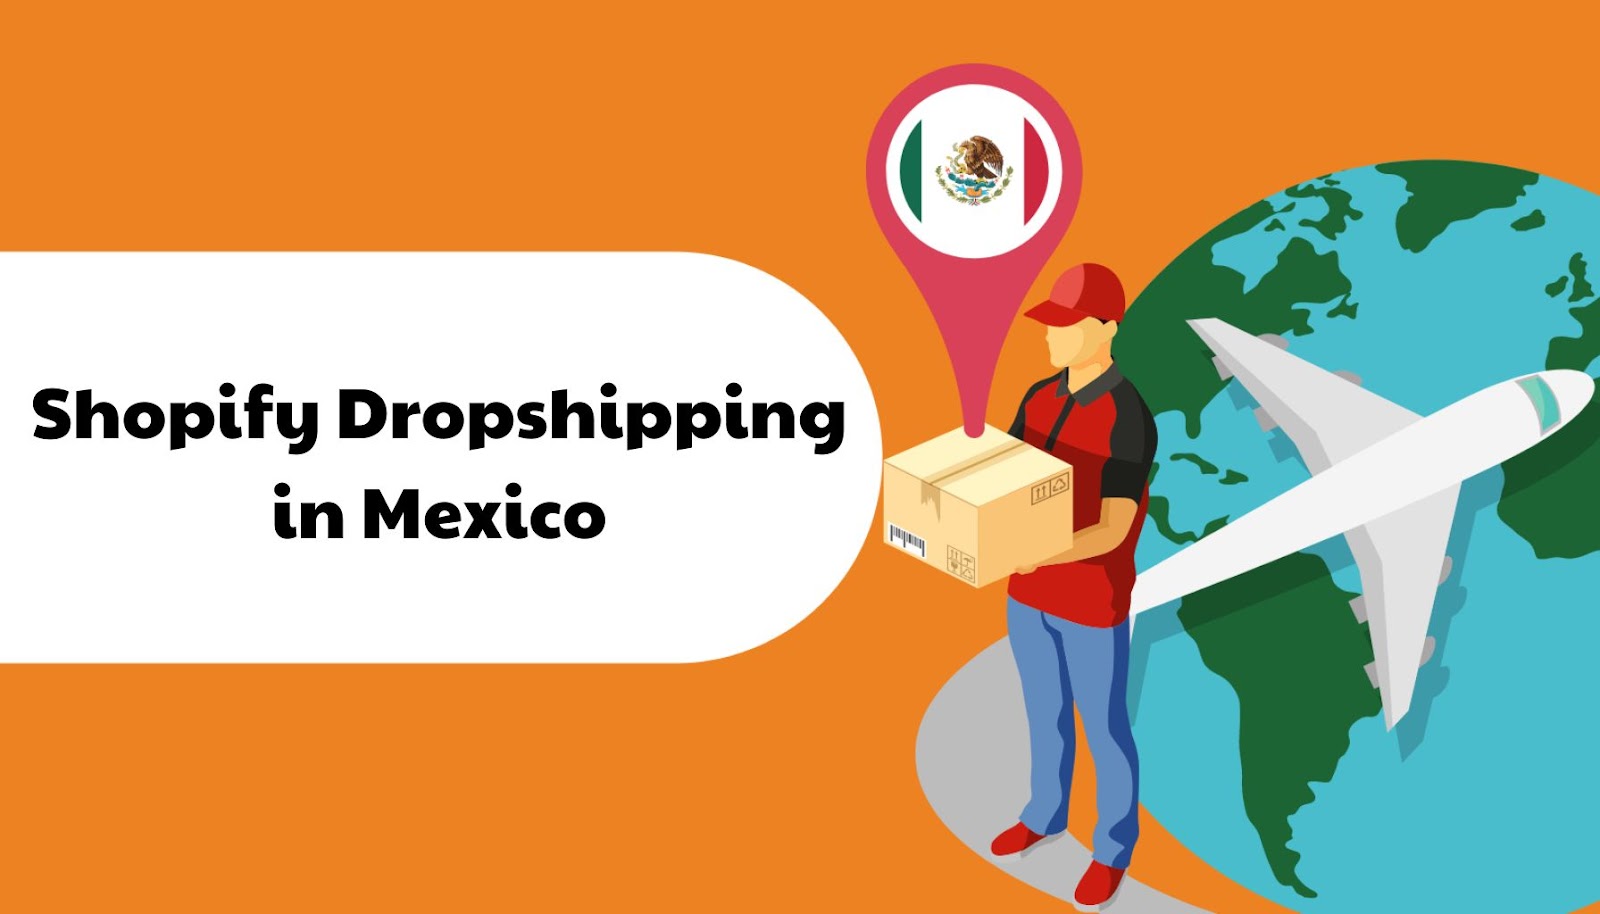 How to Get Started With Shopify Dropshipping in Mexico